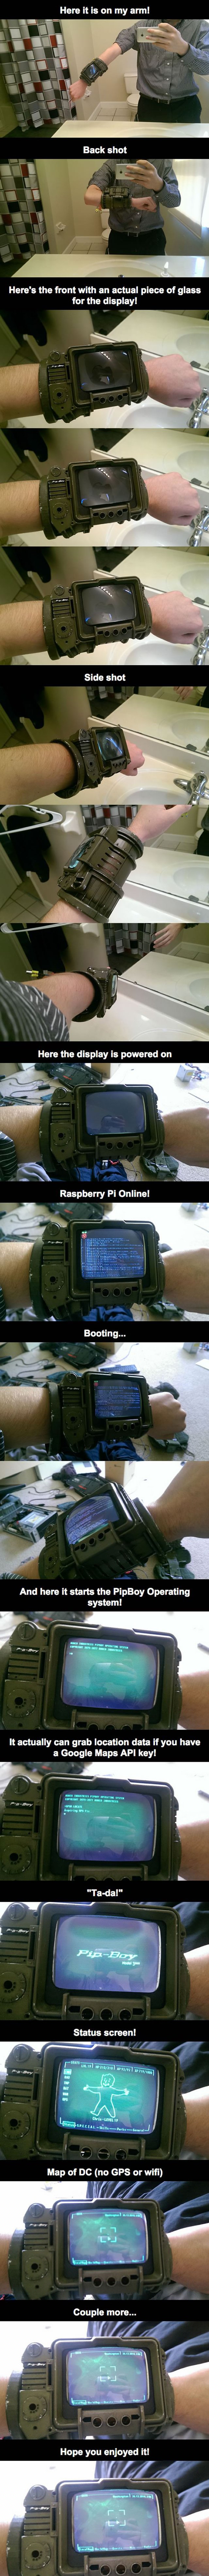 This guy made a PipBoy 3000A using Rasberry Pi